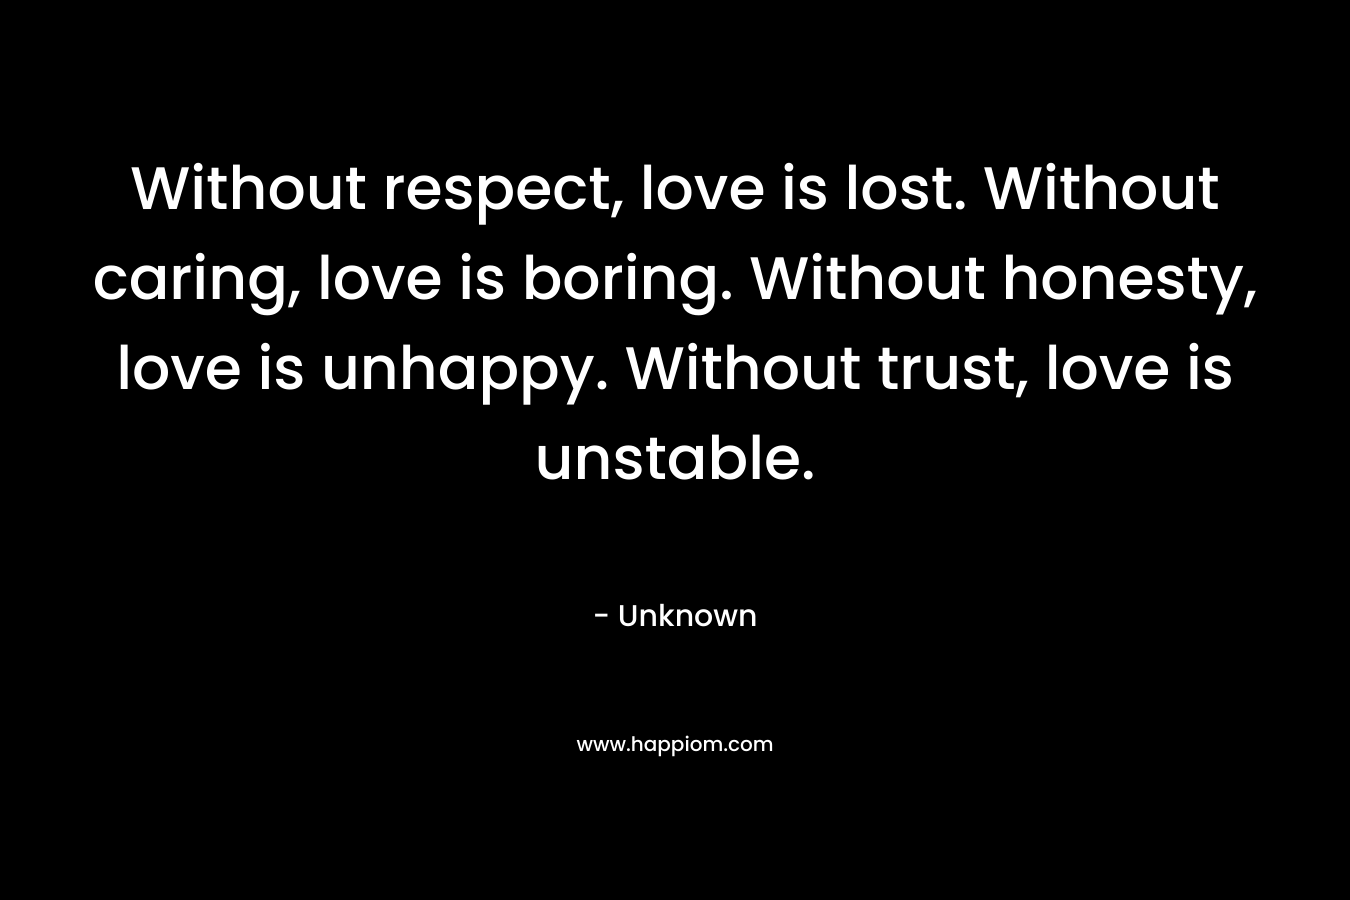 Without respect, love is lost. Without caring, love is boring. Without honesty, love is unhappy. Without trust, love is unstable.